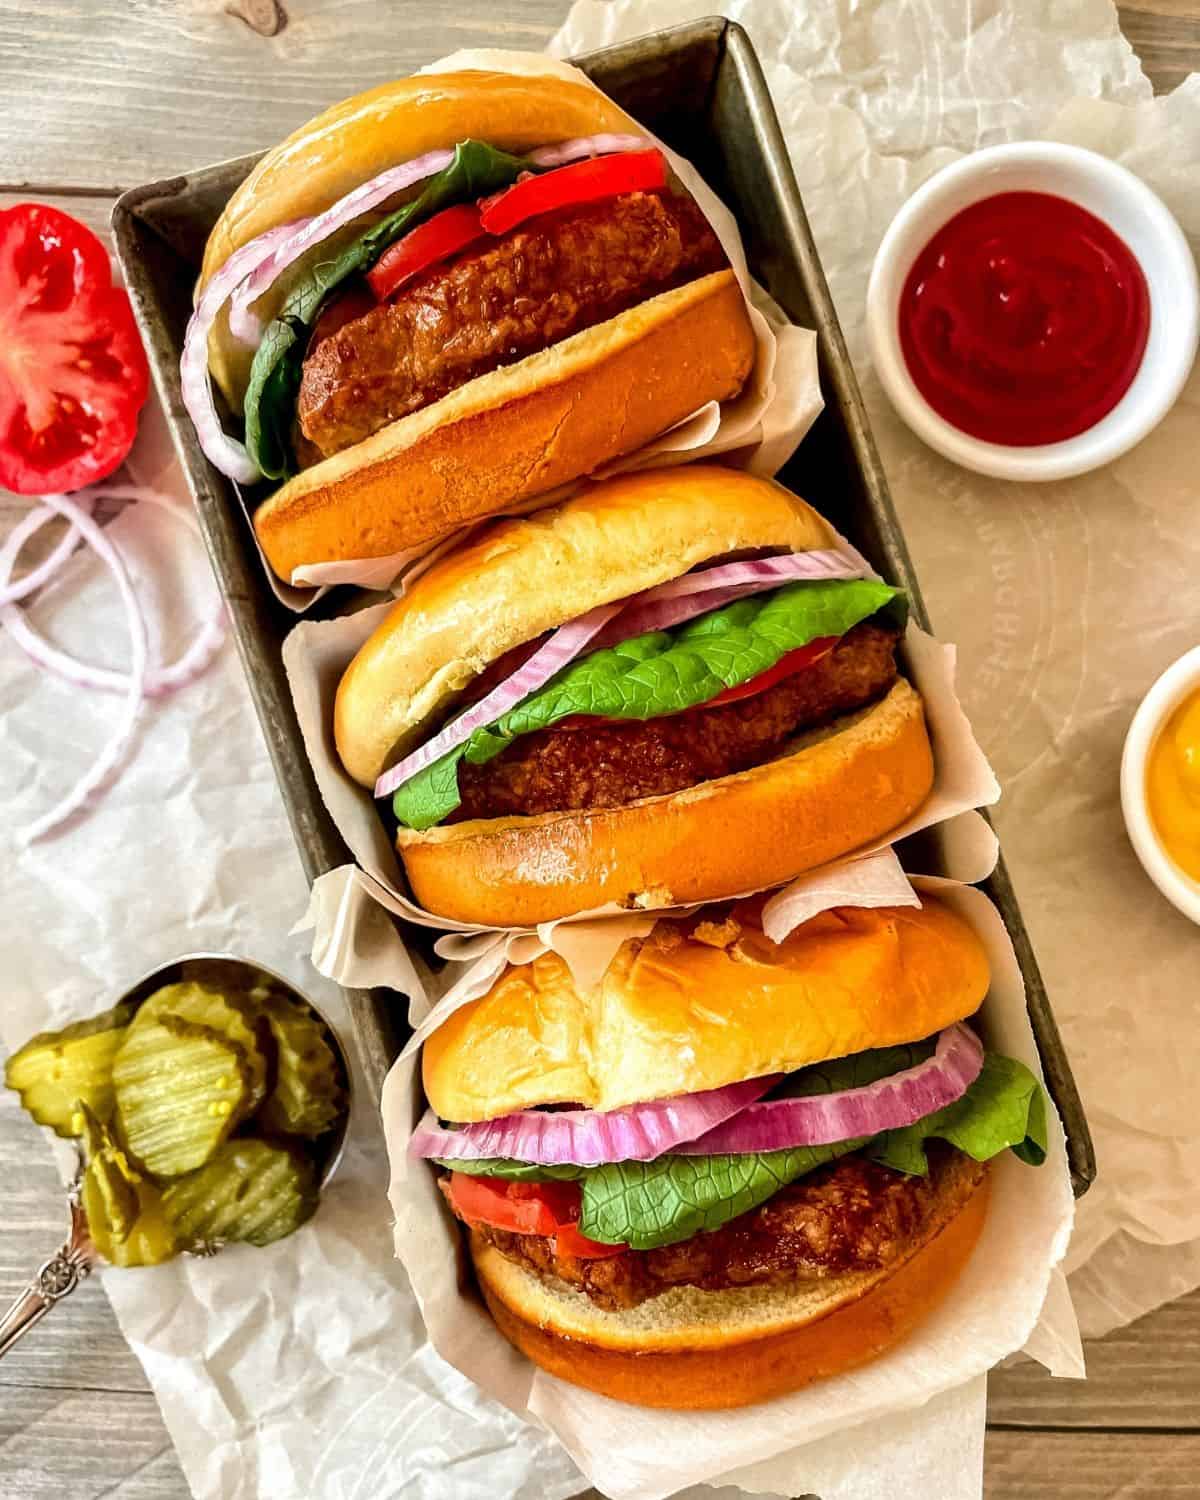 Air fryer frozen turkey burger in a bun with lettuce, onion and tomato, wrapped in parchment, stacked in a pile of three burgers, with ketchup, mustard and pickles on the side.